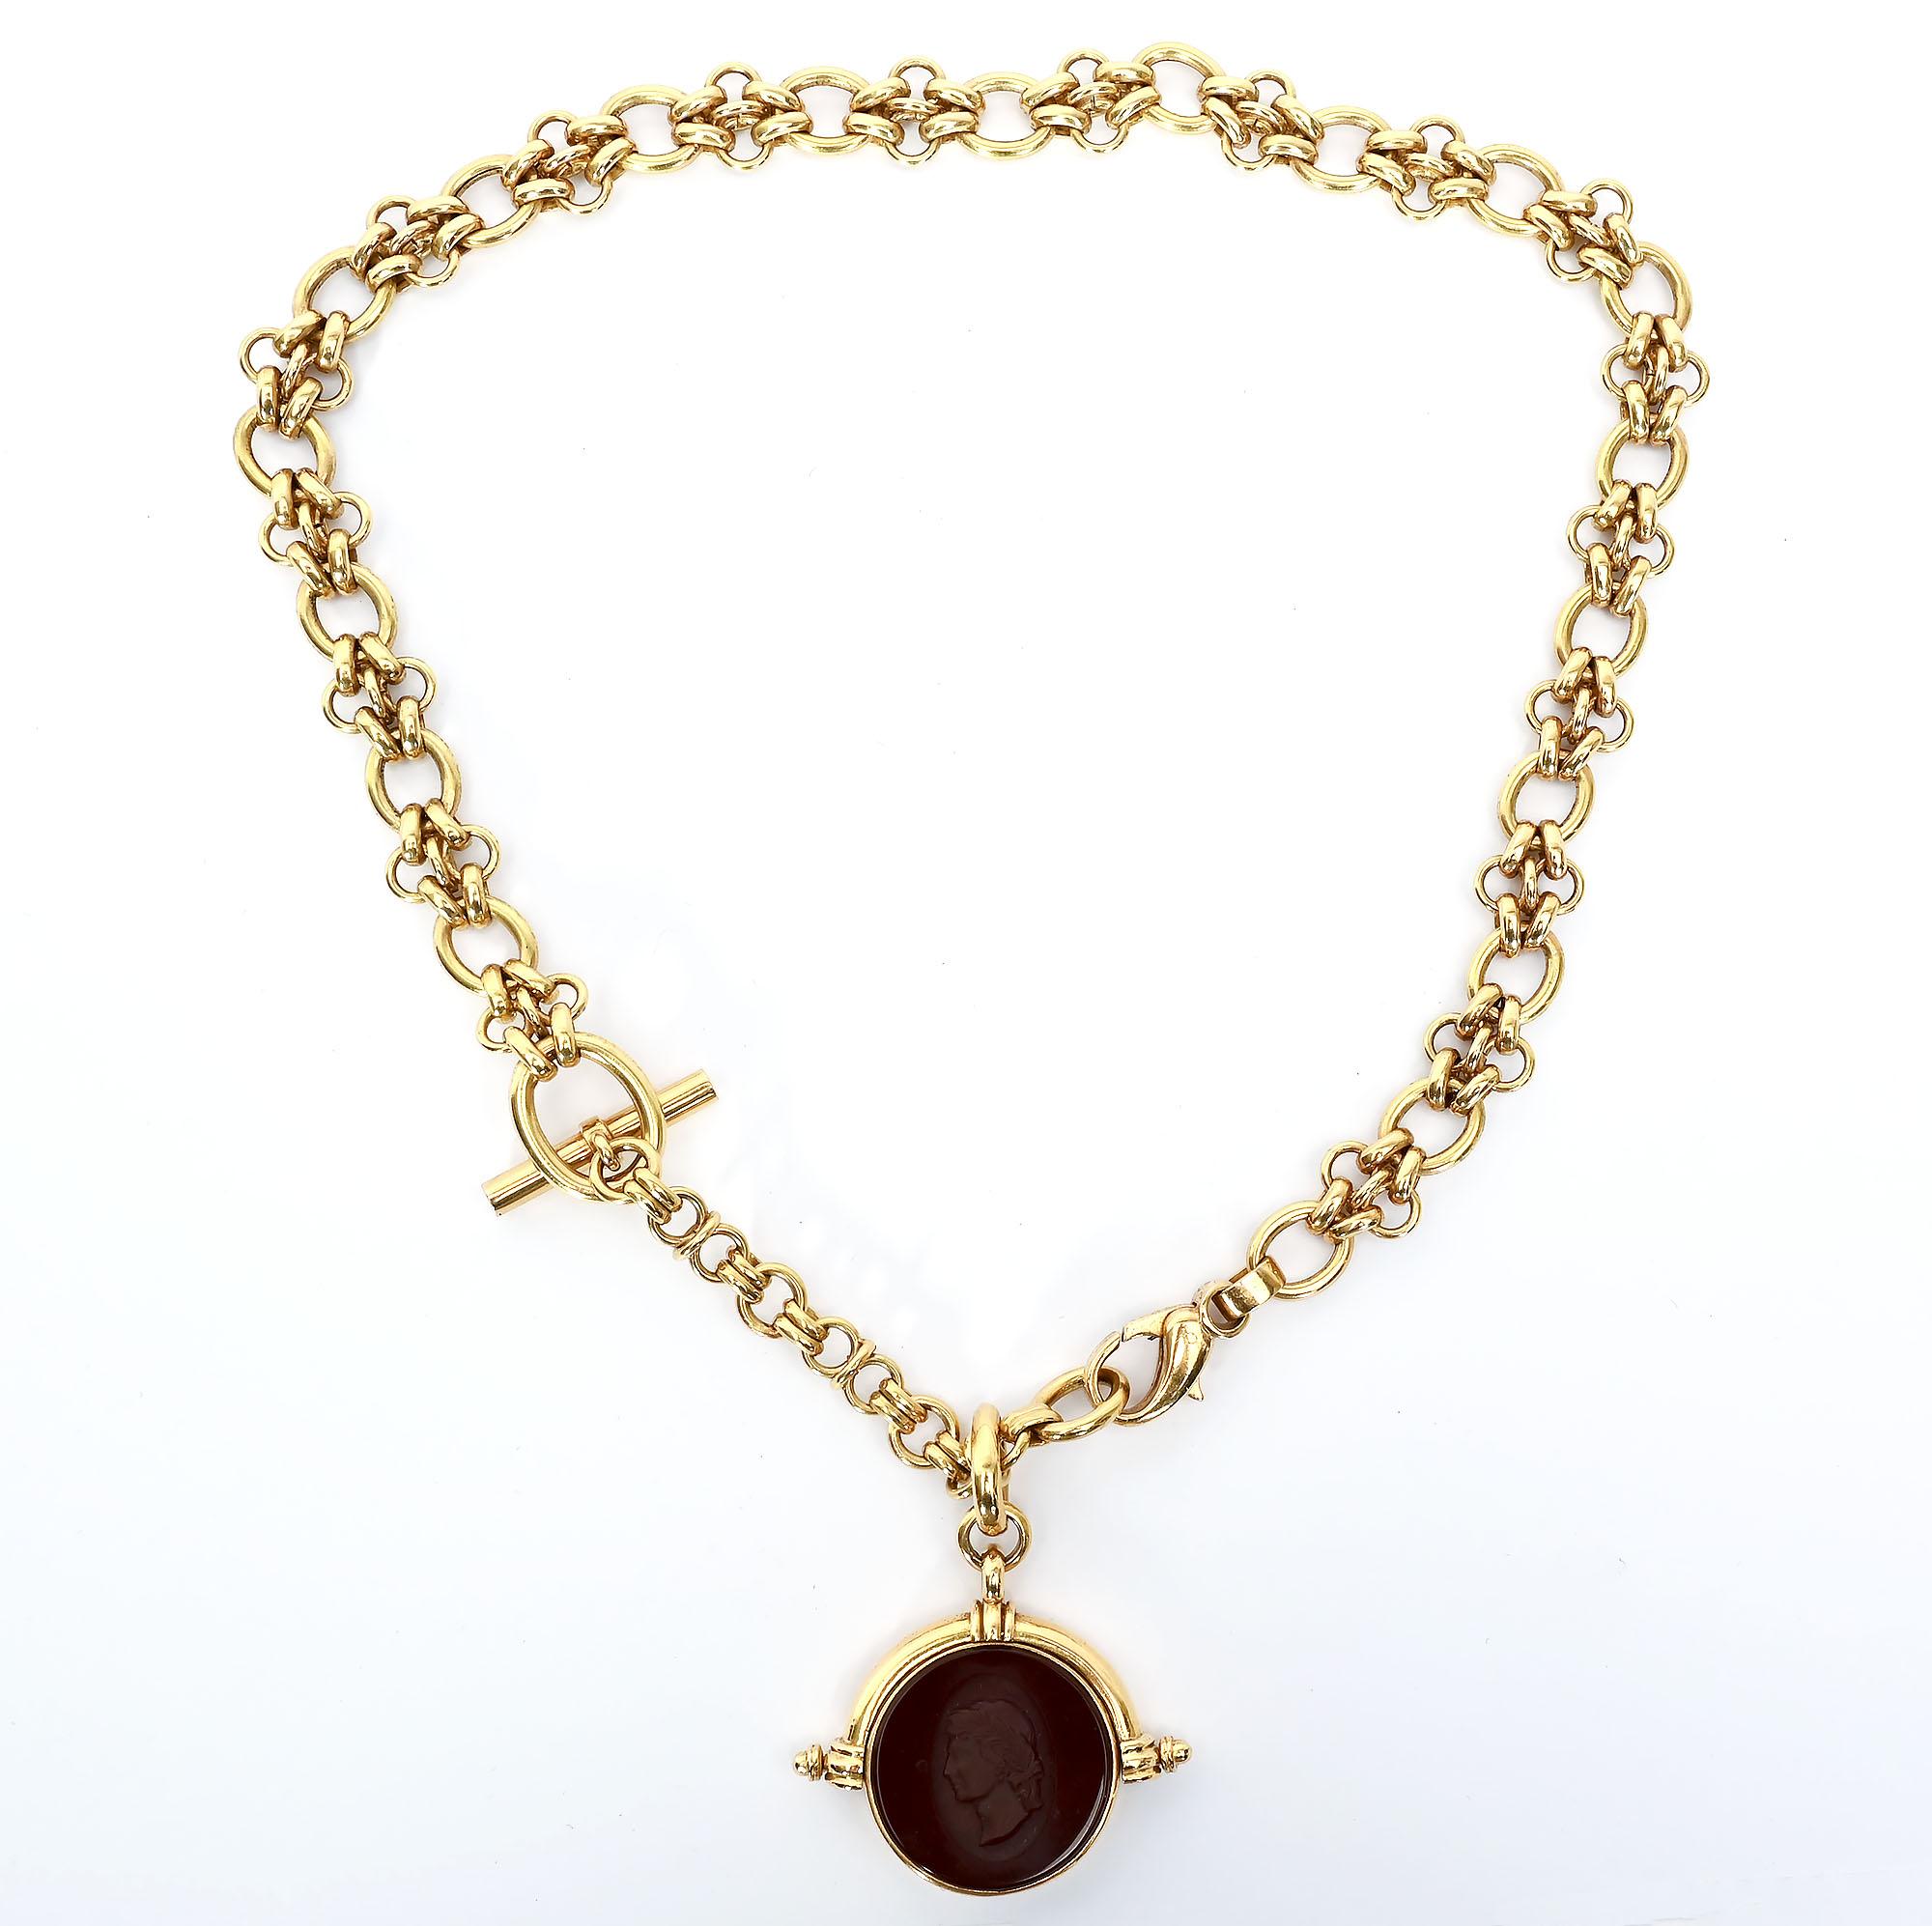 This wonderful handmade 18 karat gold necklace can be worn in two ways. As a chain alone, it measures 16 1/4 inches. The links are half an inch wide.  From an additional chain of 3 inches is suspended a round carnelian pendant with a finely carved